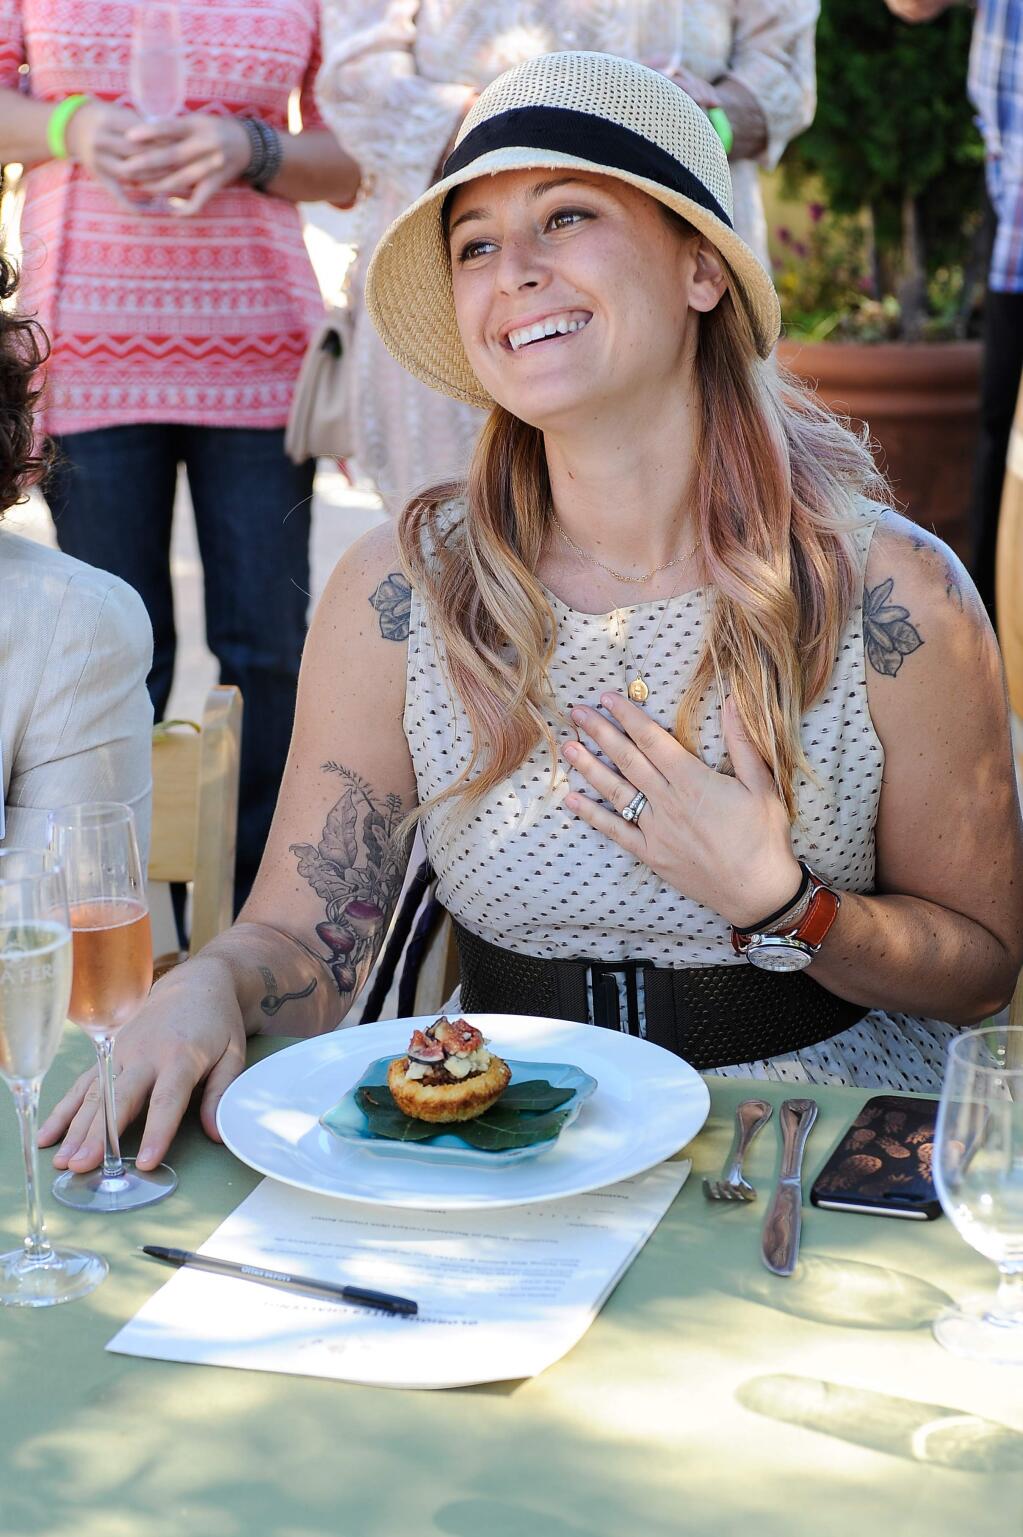 Brooke Williamson, 'Top Chef' season 10 runner-up and lead judge in the 2015 Glorious Bites competition, savors one of the finalists, brioche bites with pate, shallots, blue cheese and figs from finalist Jamie Brown-Miller of Napa, California.(Photo by Michale Angelo Grassia)